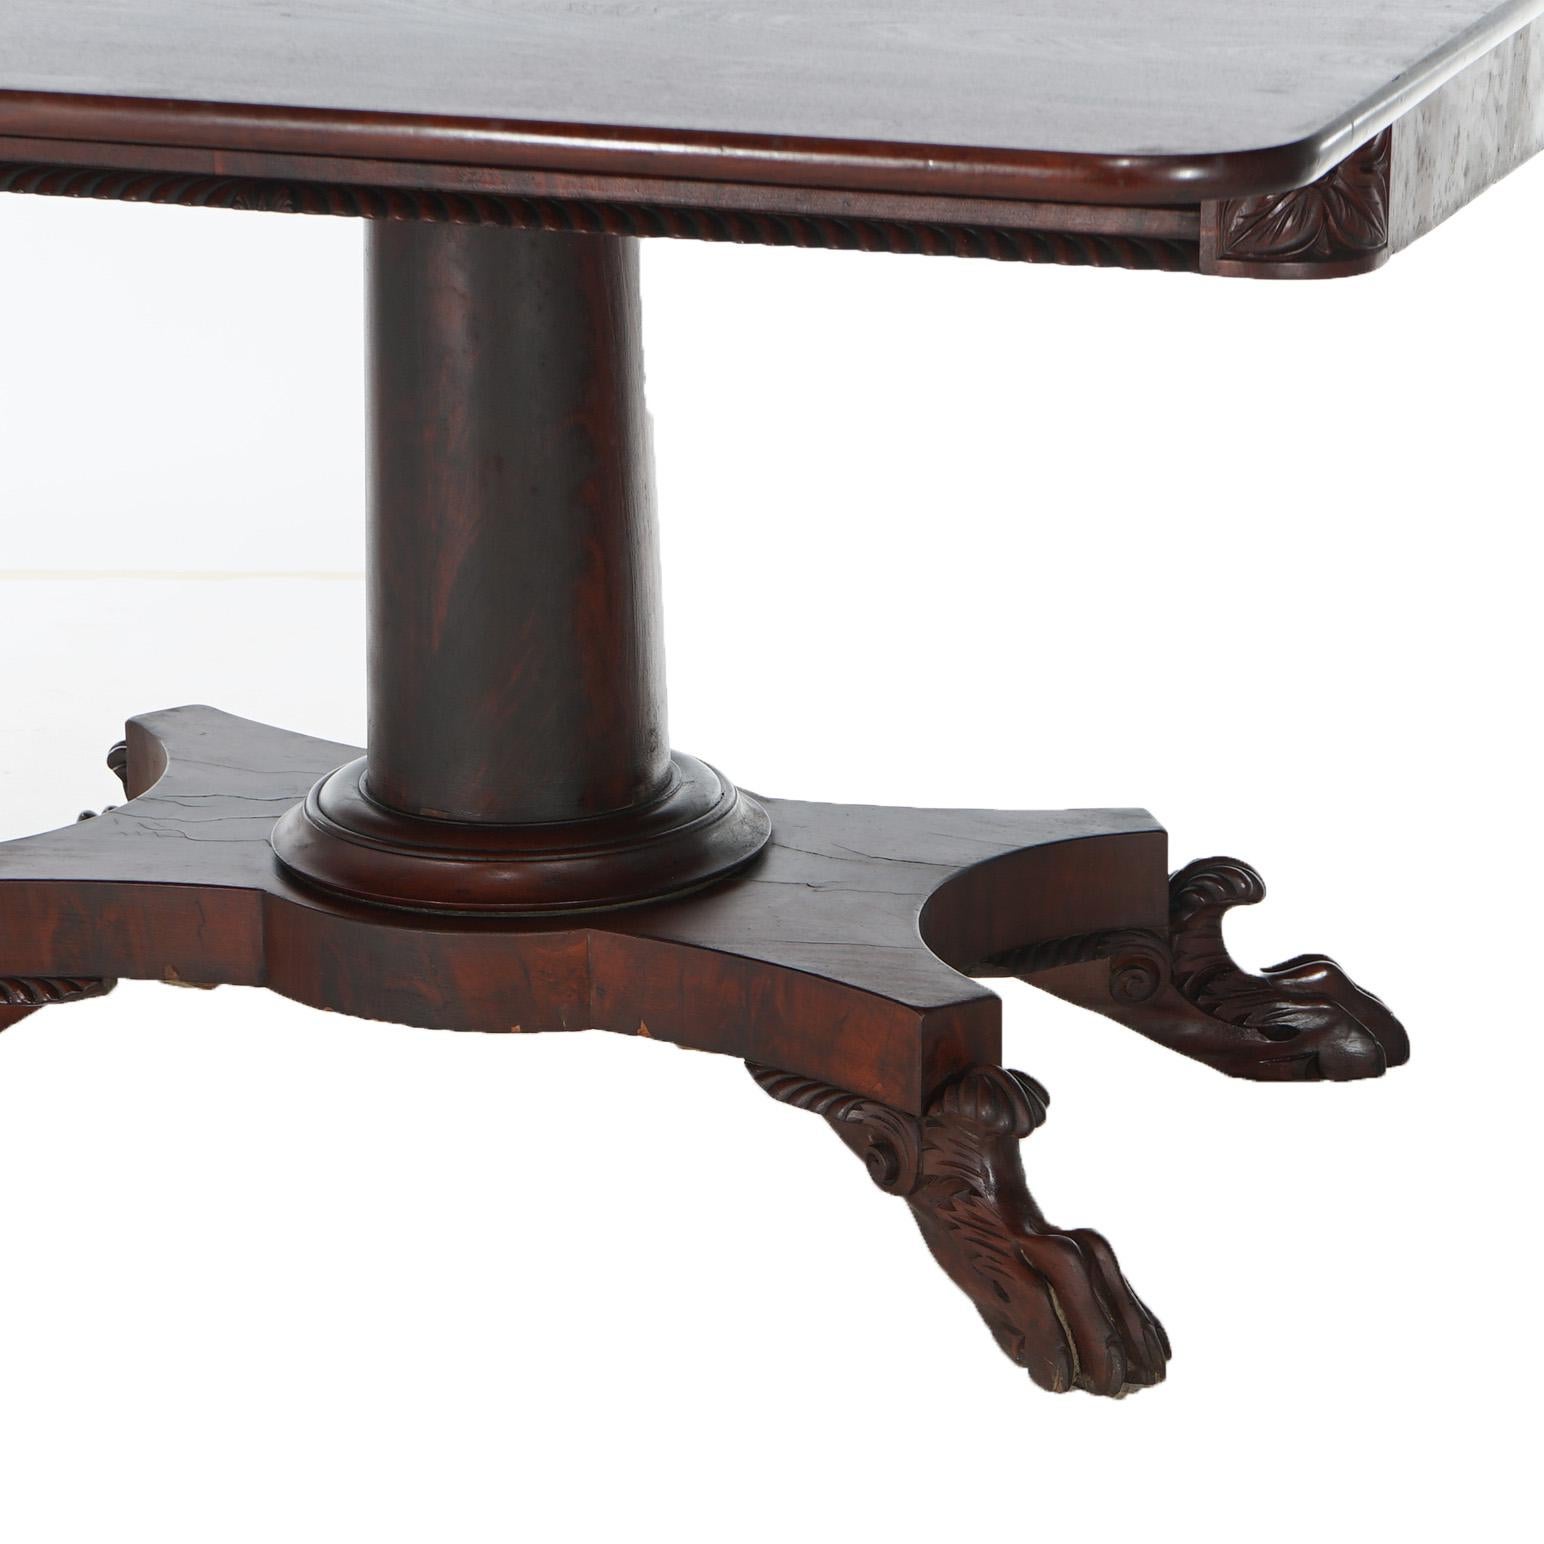 Antique American Empire Flame Mahogany Card Table Circa 1840 For Sale 1